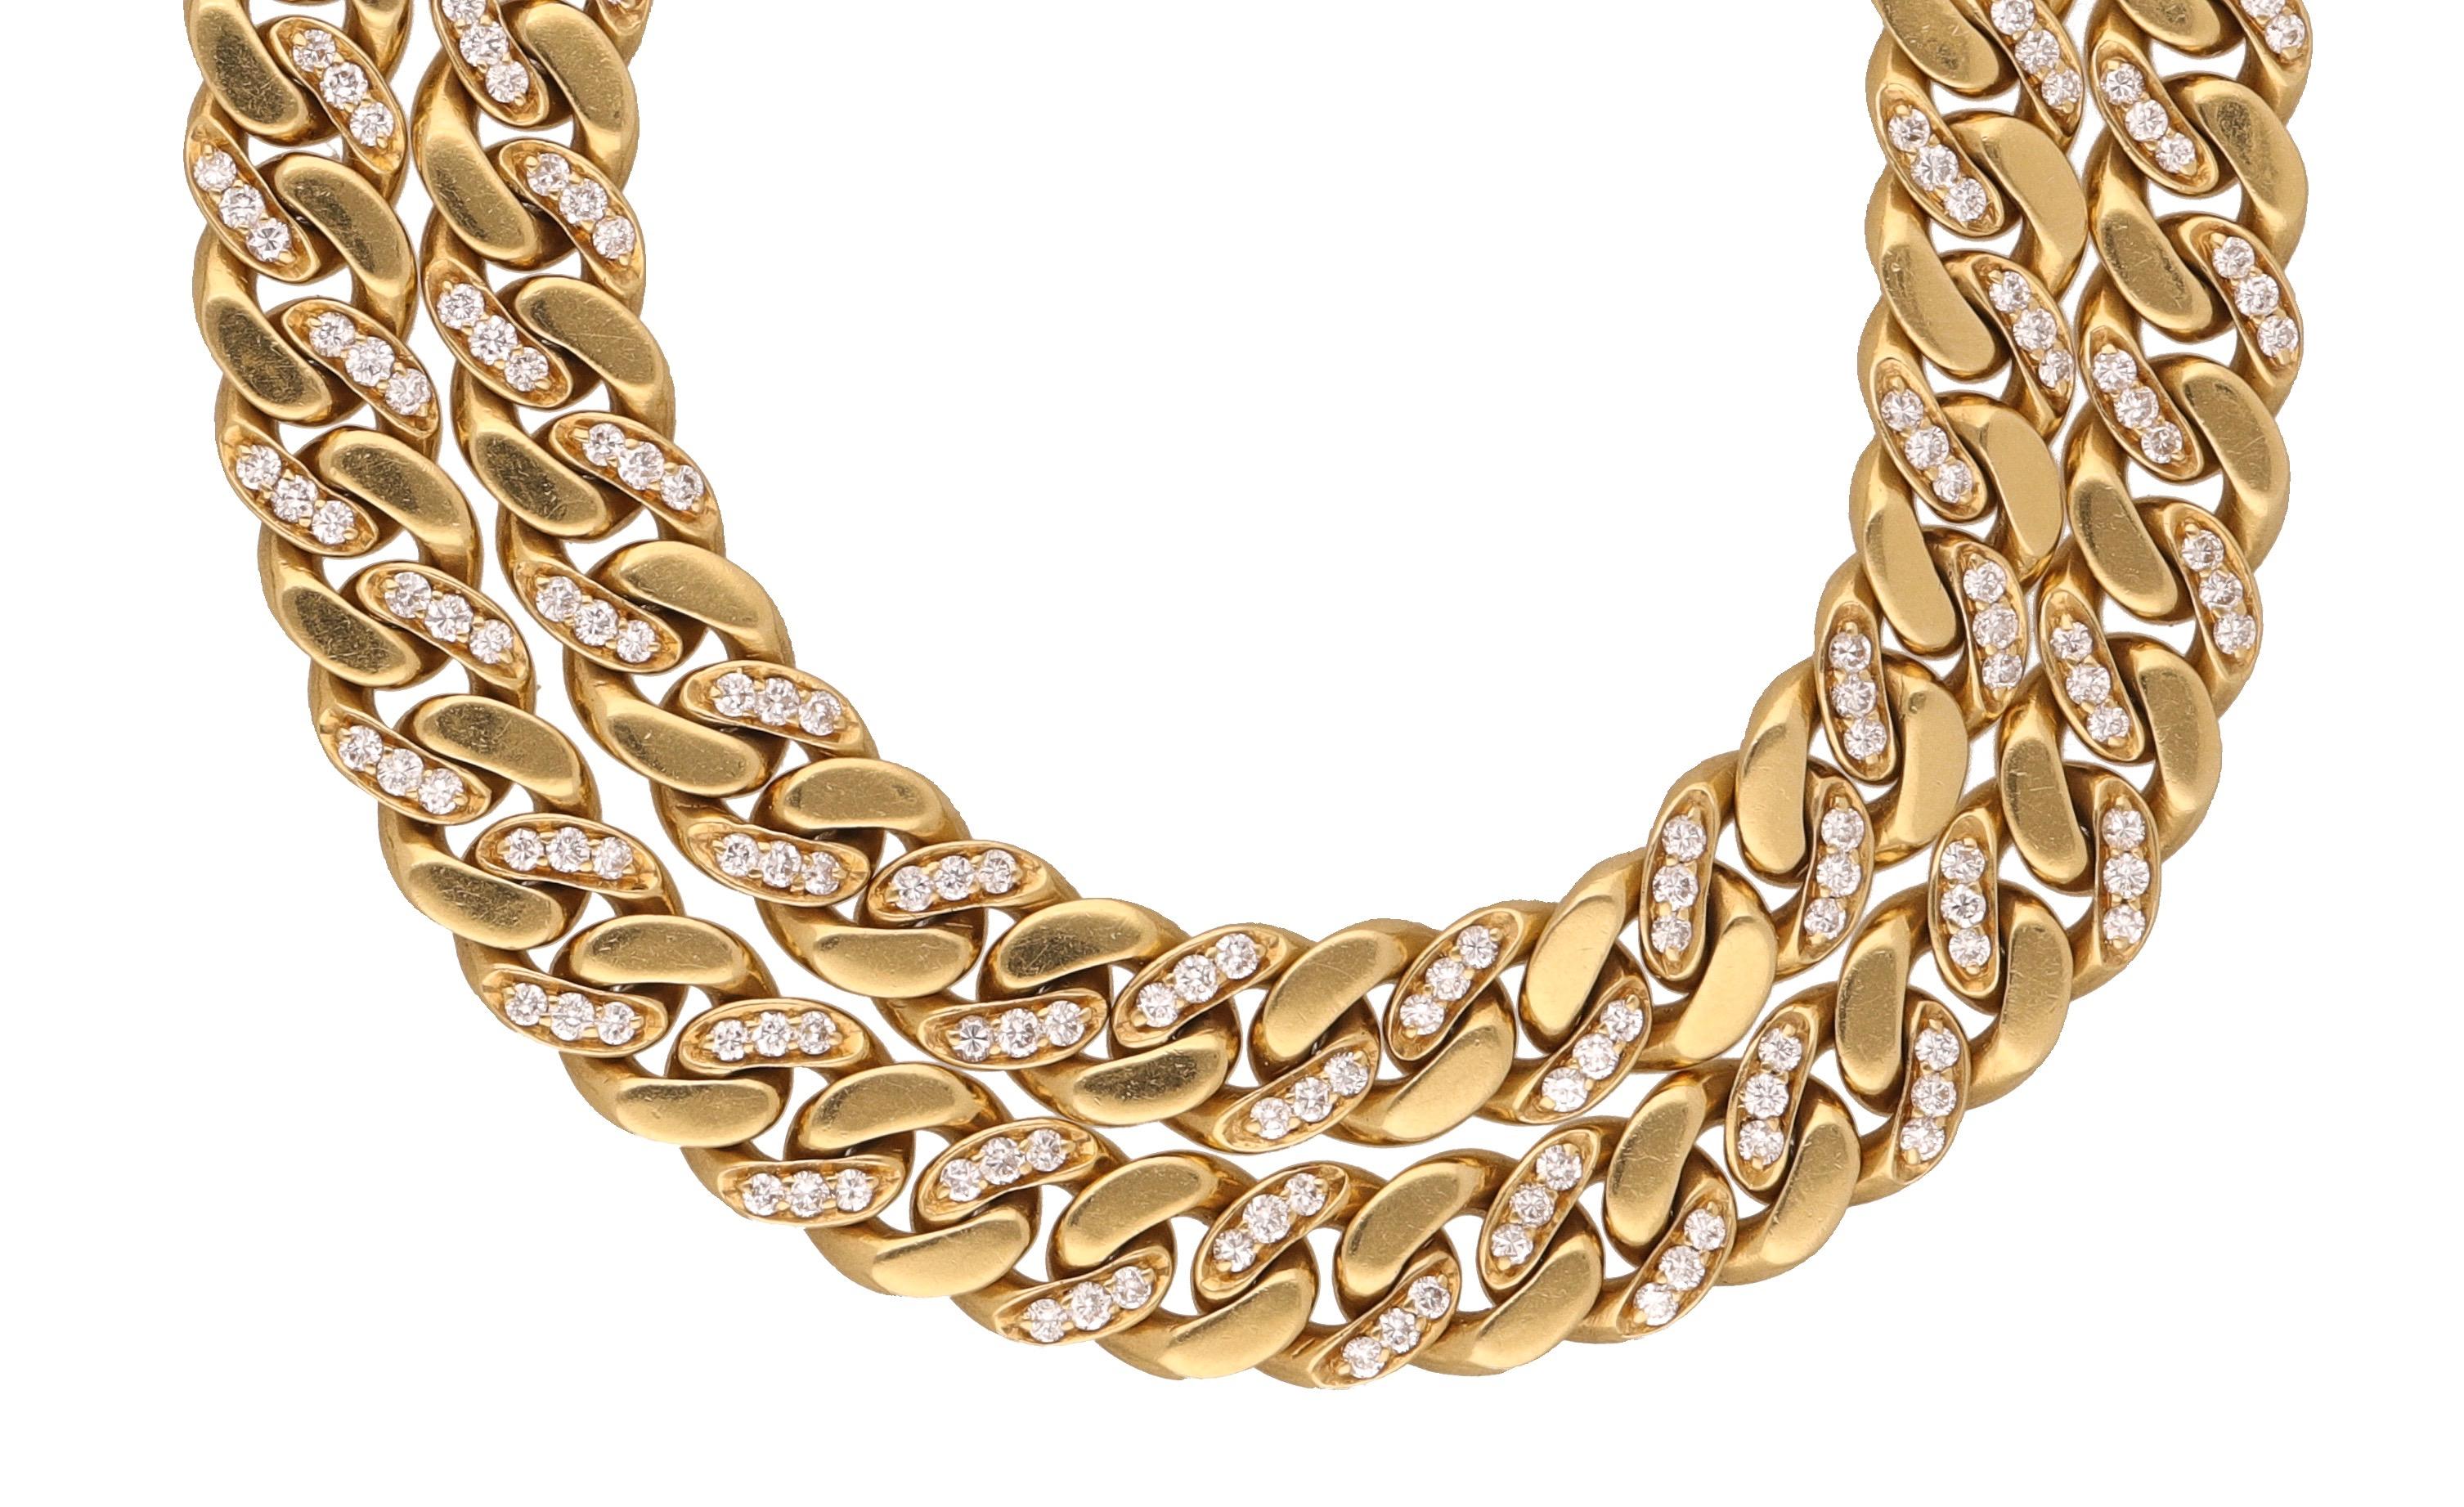 18 kt. yellow gold ( gr. 193,90 ) groumette necklace with 8.80 ct. of round-cut diamonds signed by Bulgari.
This classic necklace is hand-made in Italy.
1980 ca.
Lenght cm. 88,00